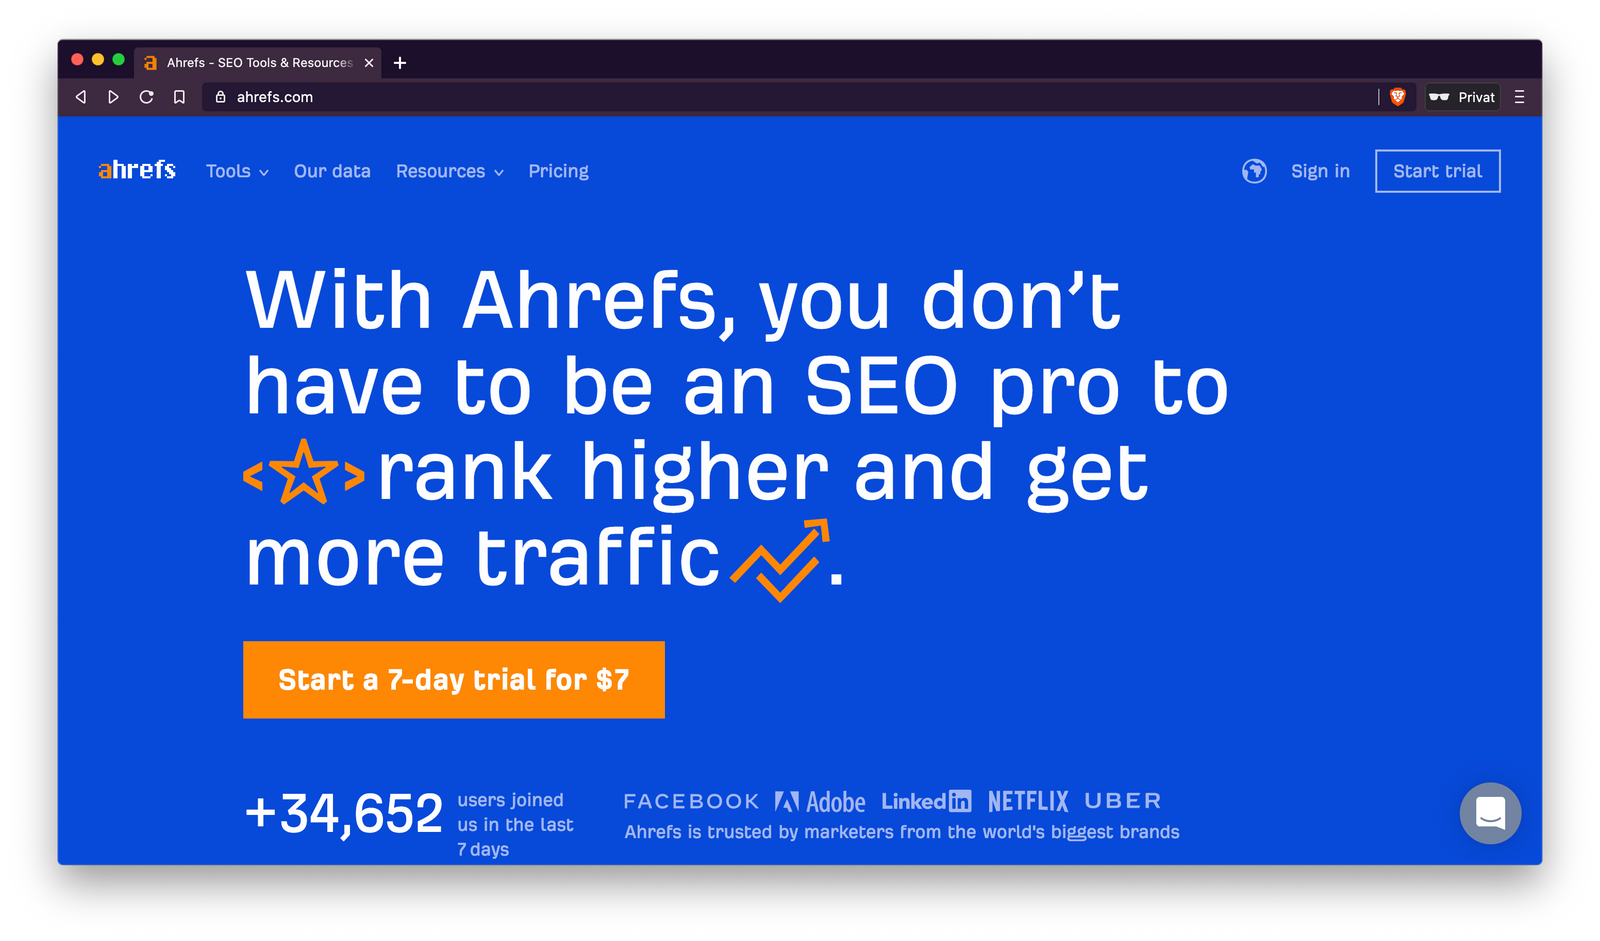 Ahrefs 7-day trial for $7